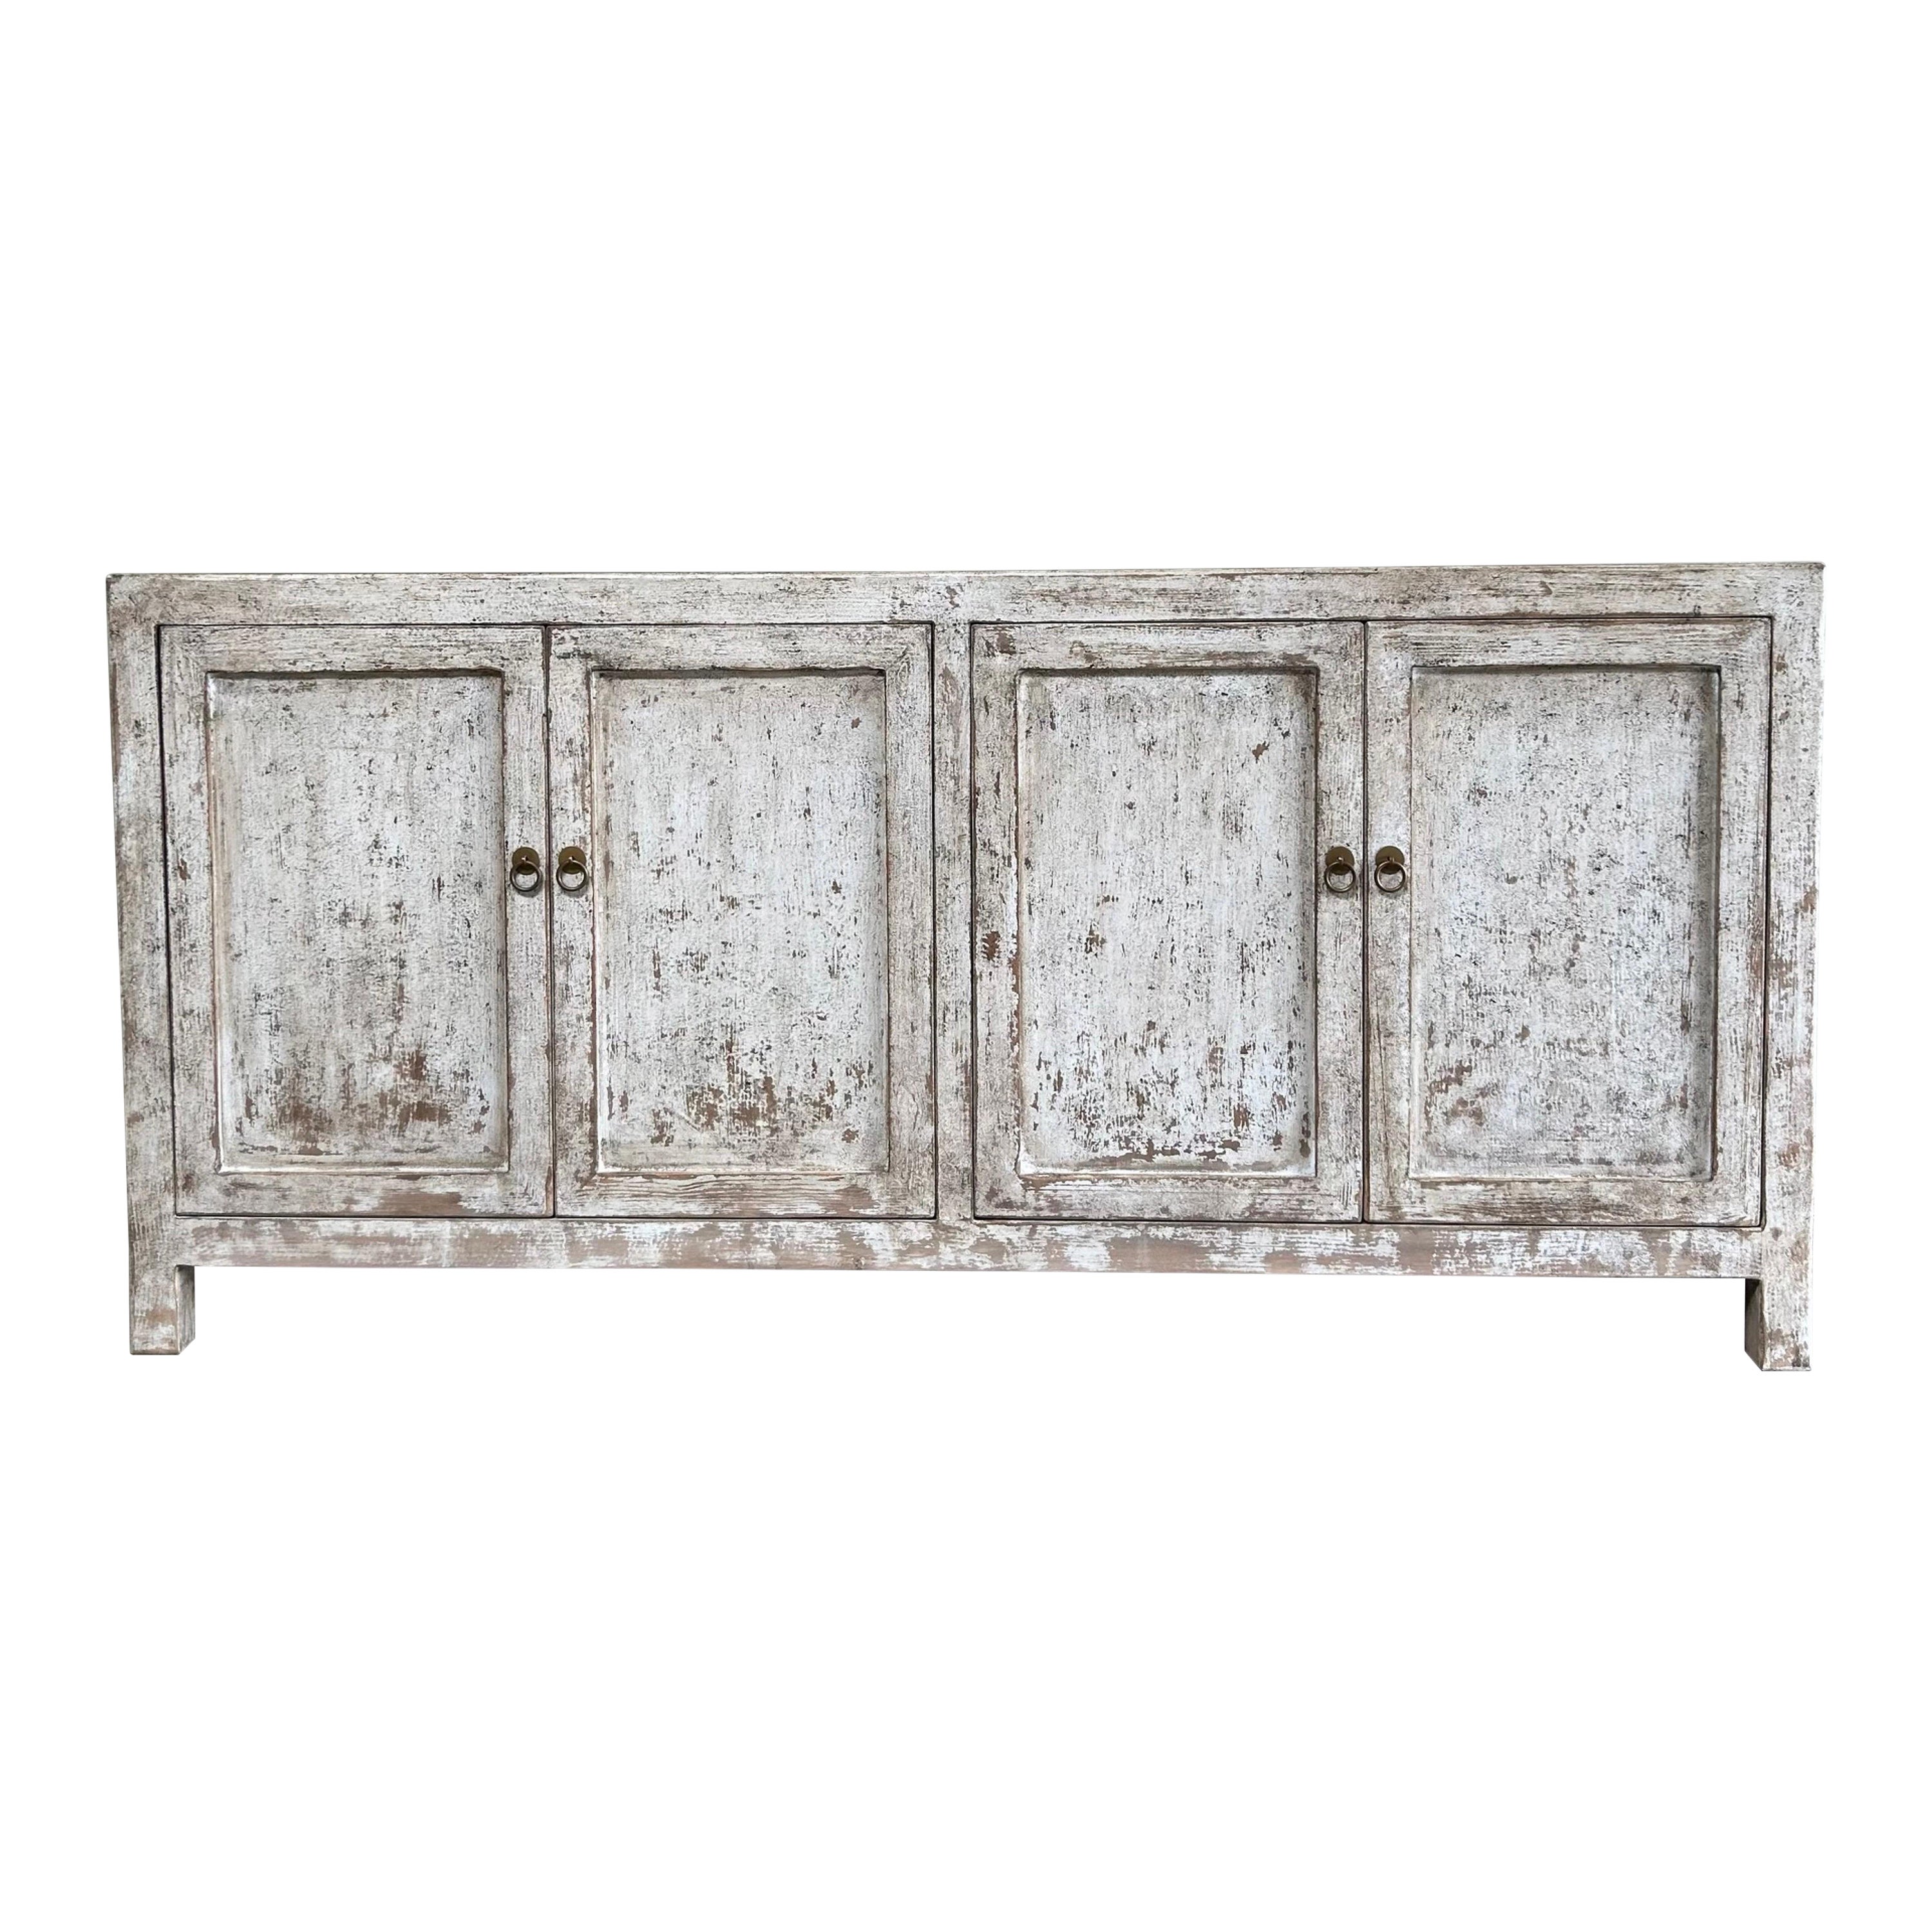 Custom Reclaimed Elm & Pine Wood Cabinet in Distressed White with 4 Doors